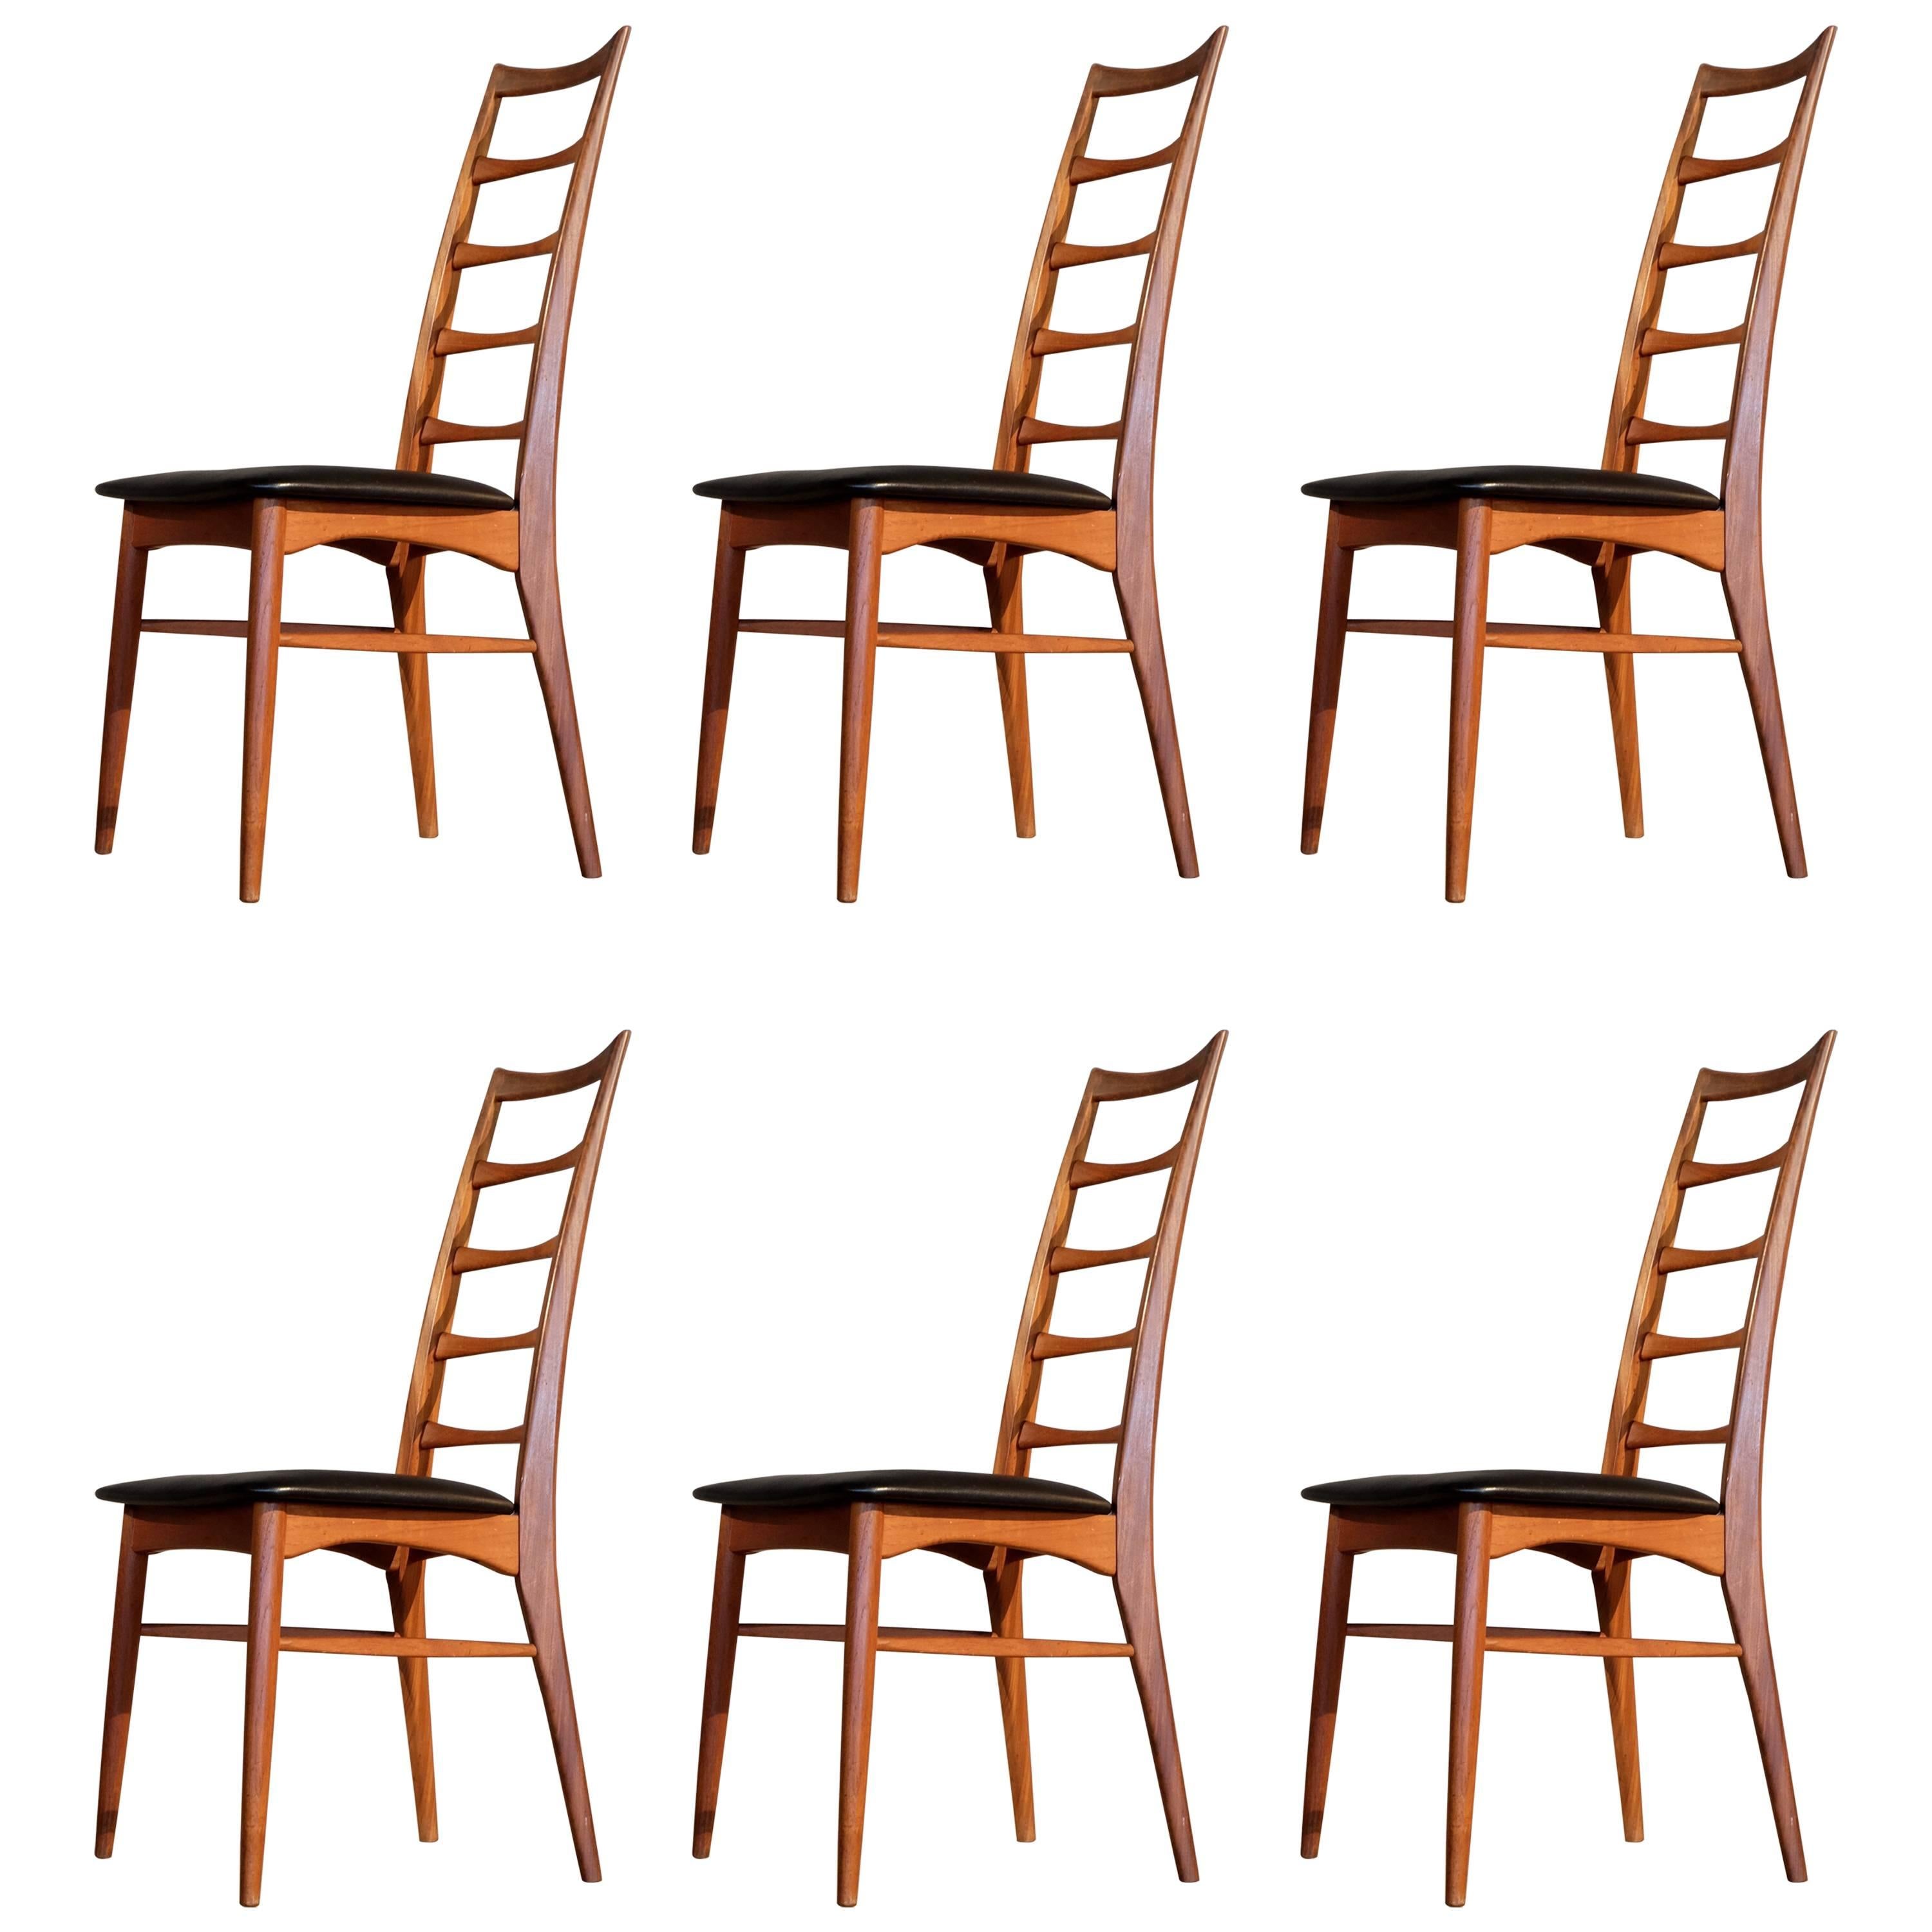 Set of Six Niels Koefoed Dining Room Chairs, Denmark 1960s